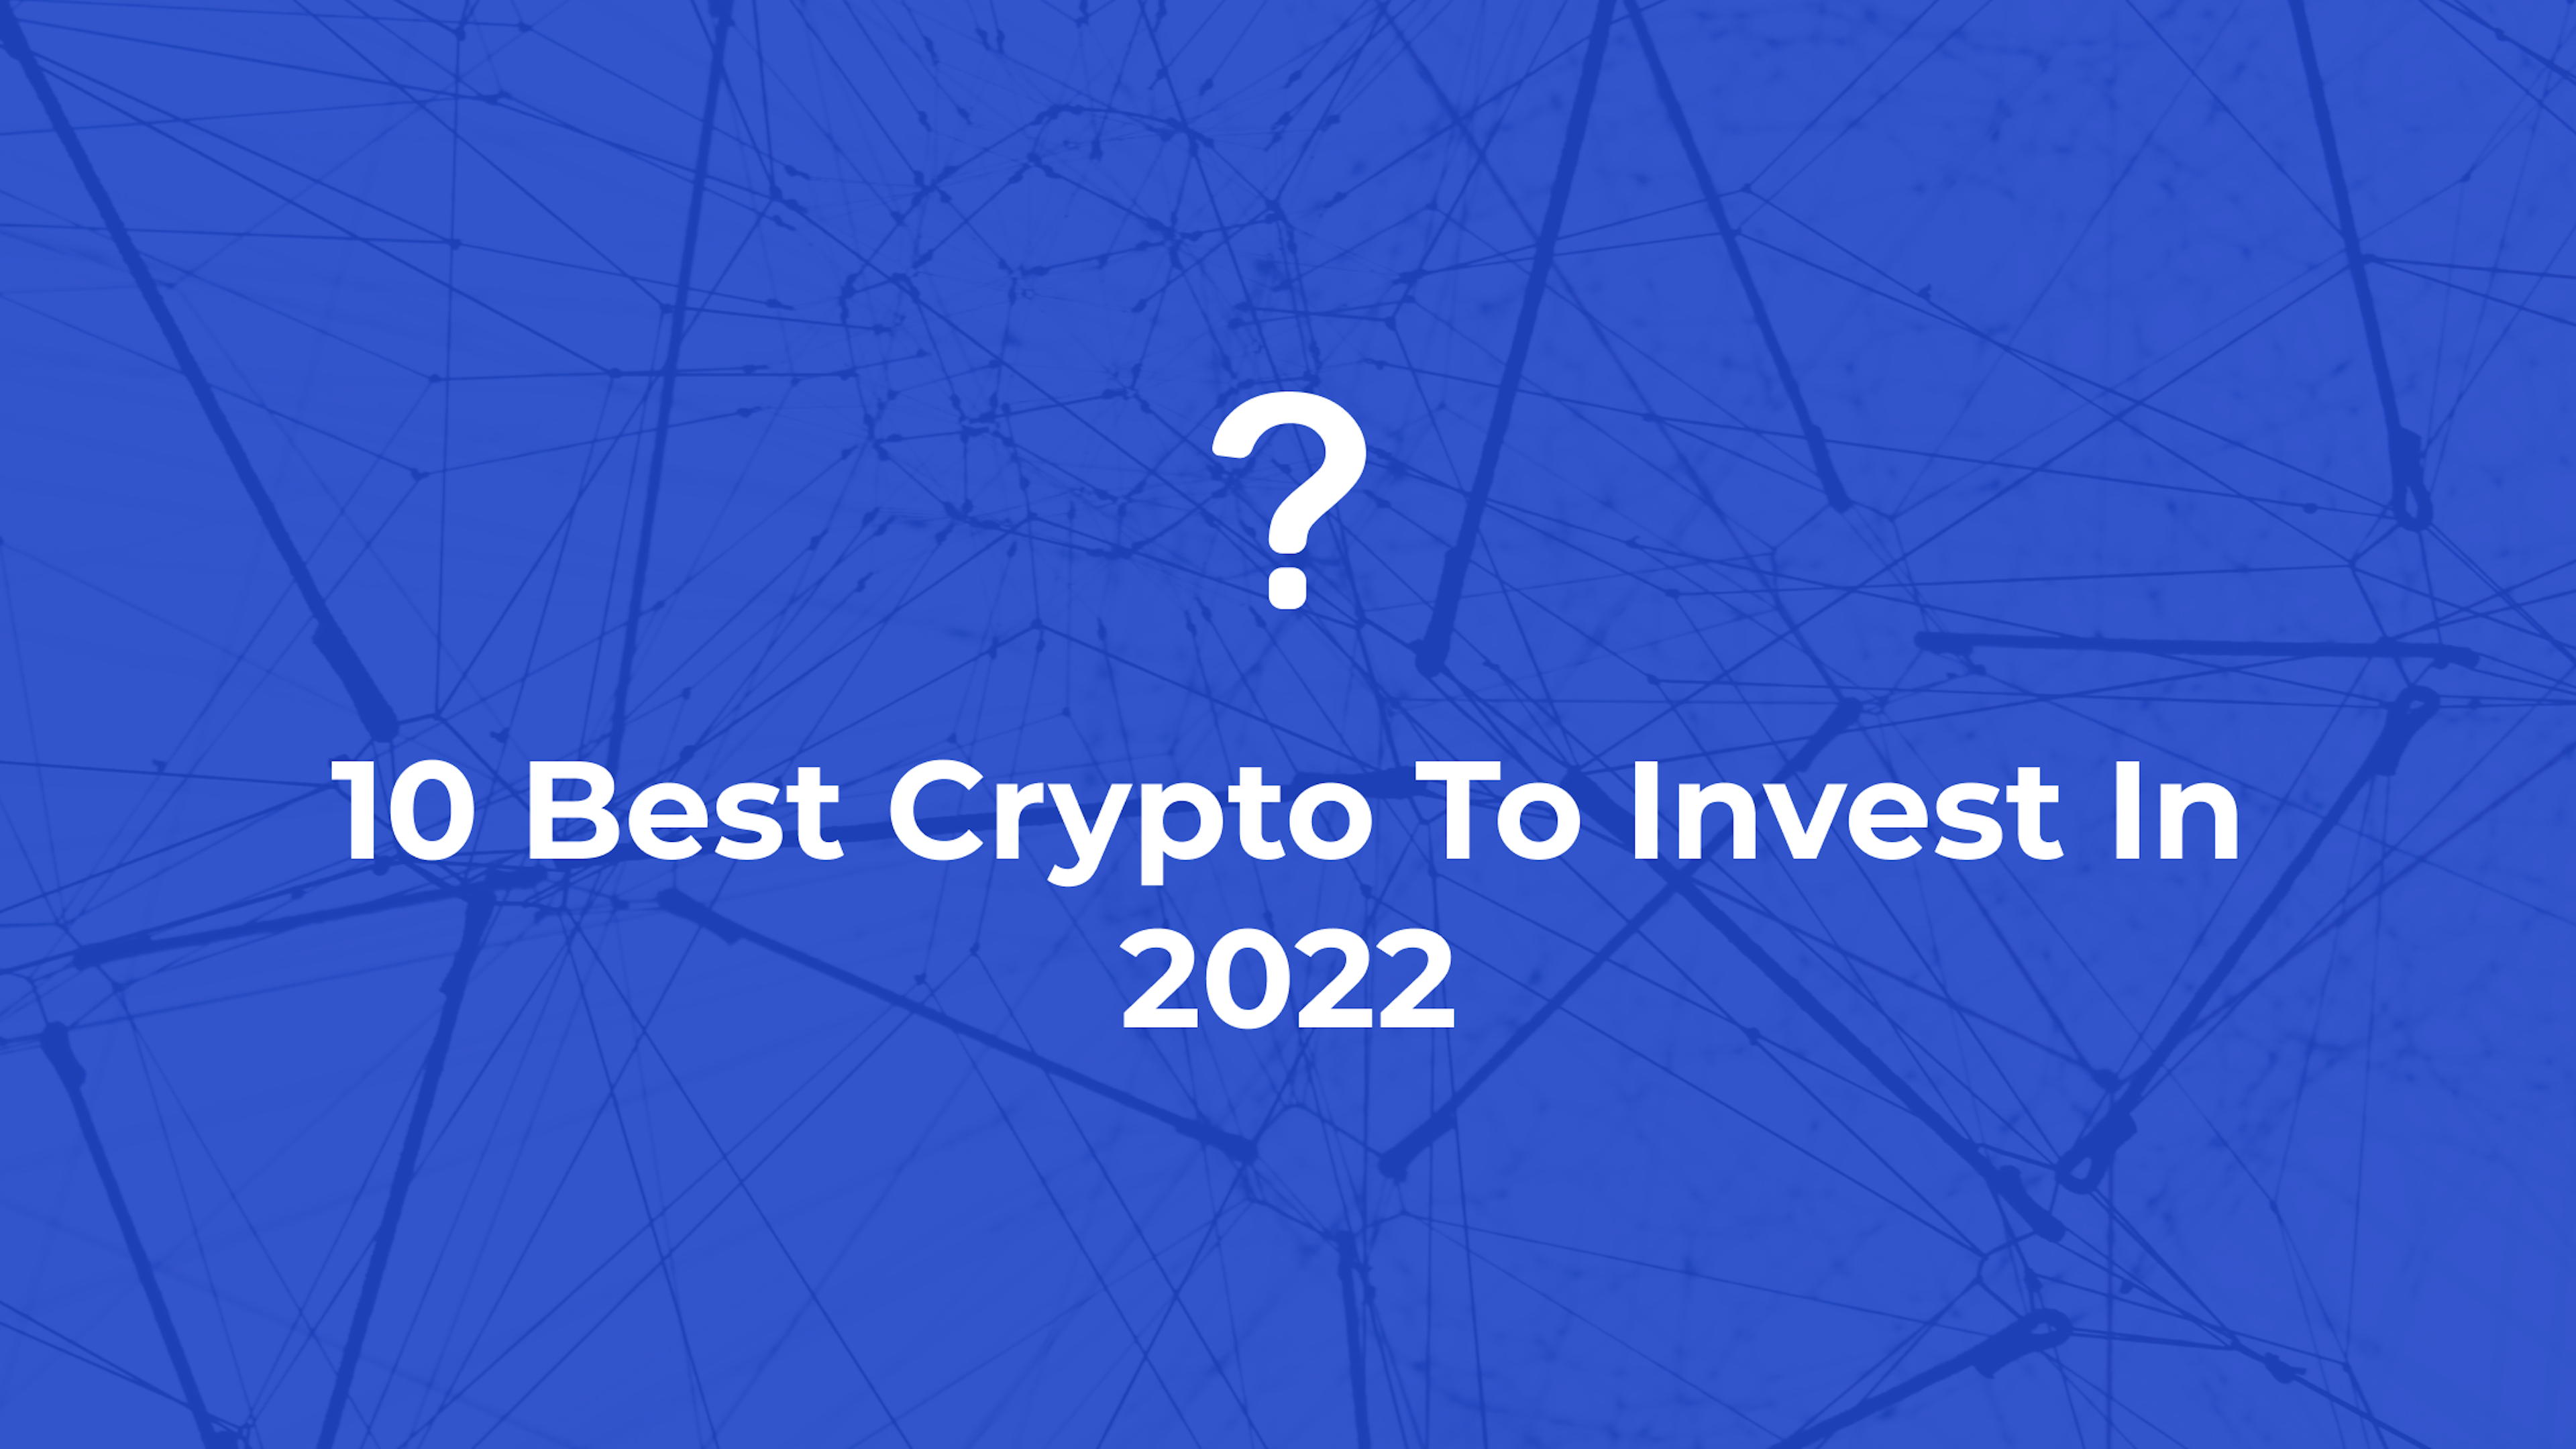 10 Best Crypto To Invest In 2022